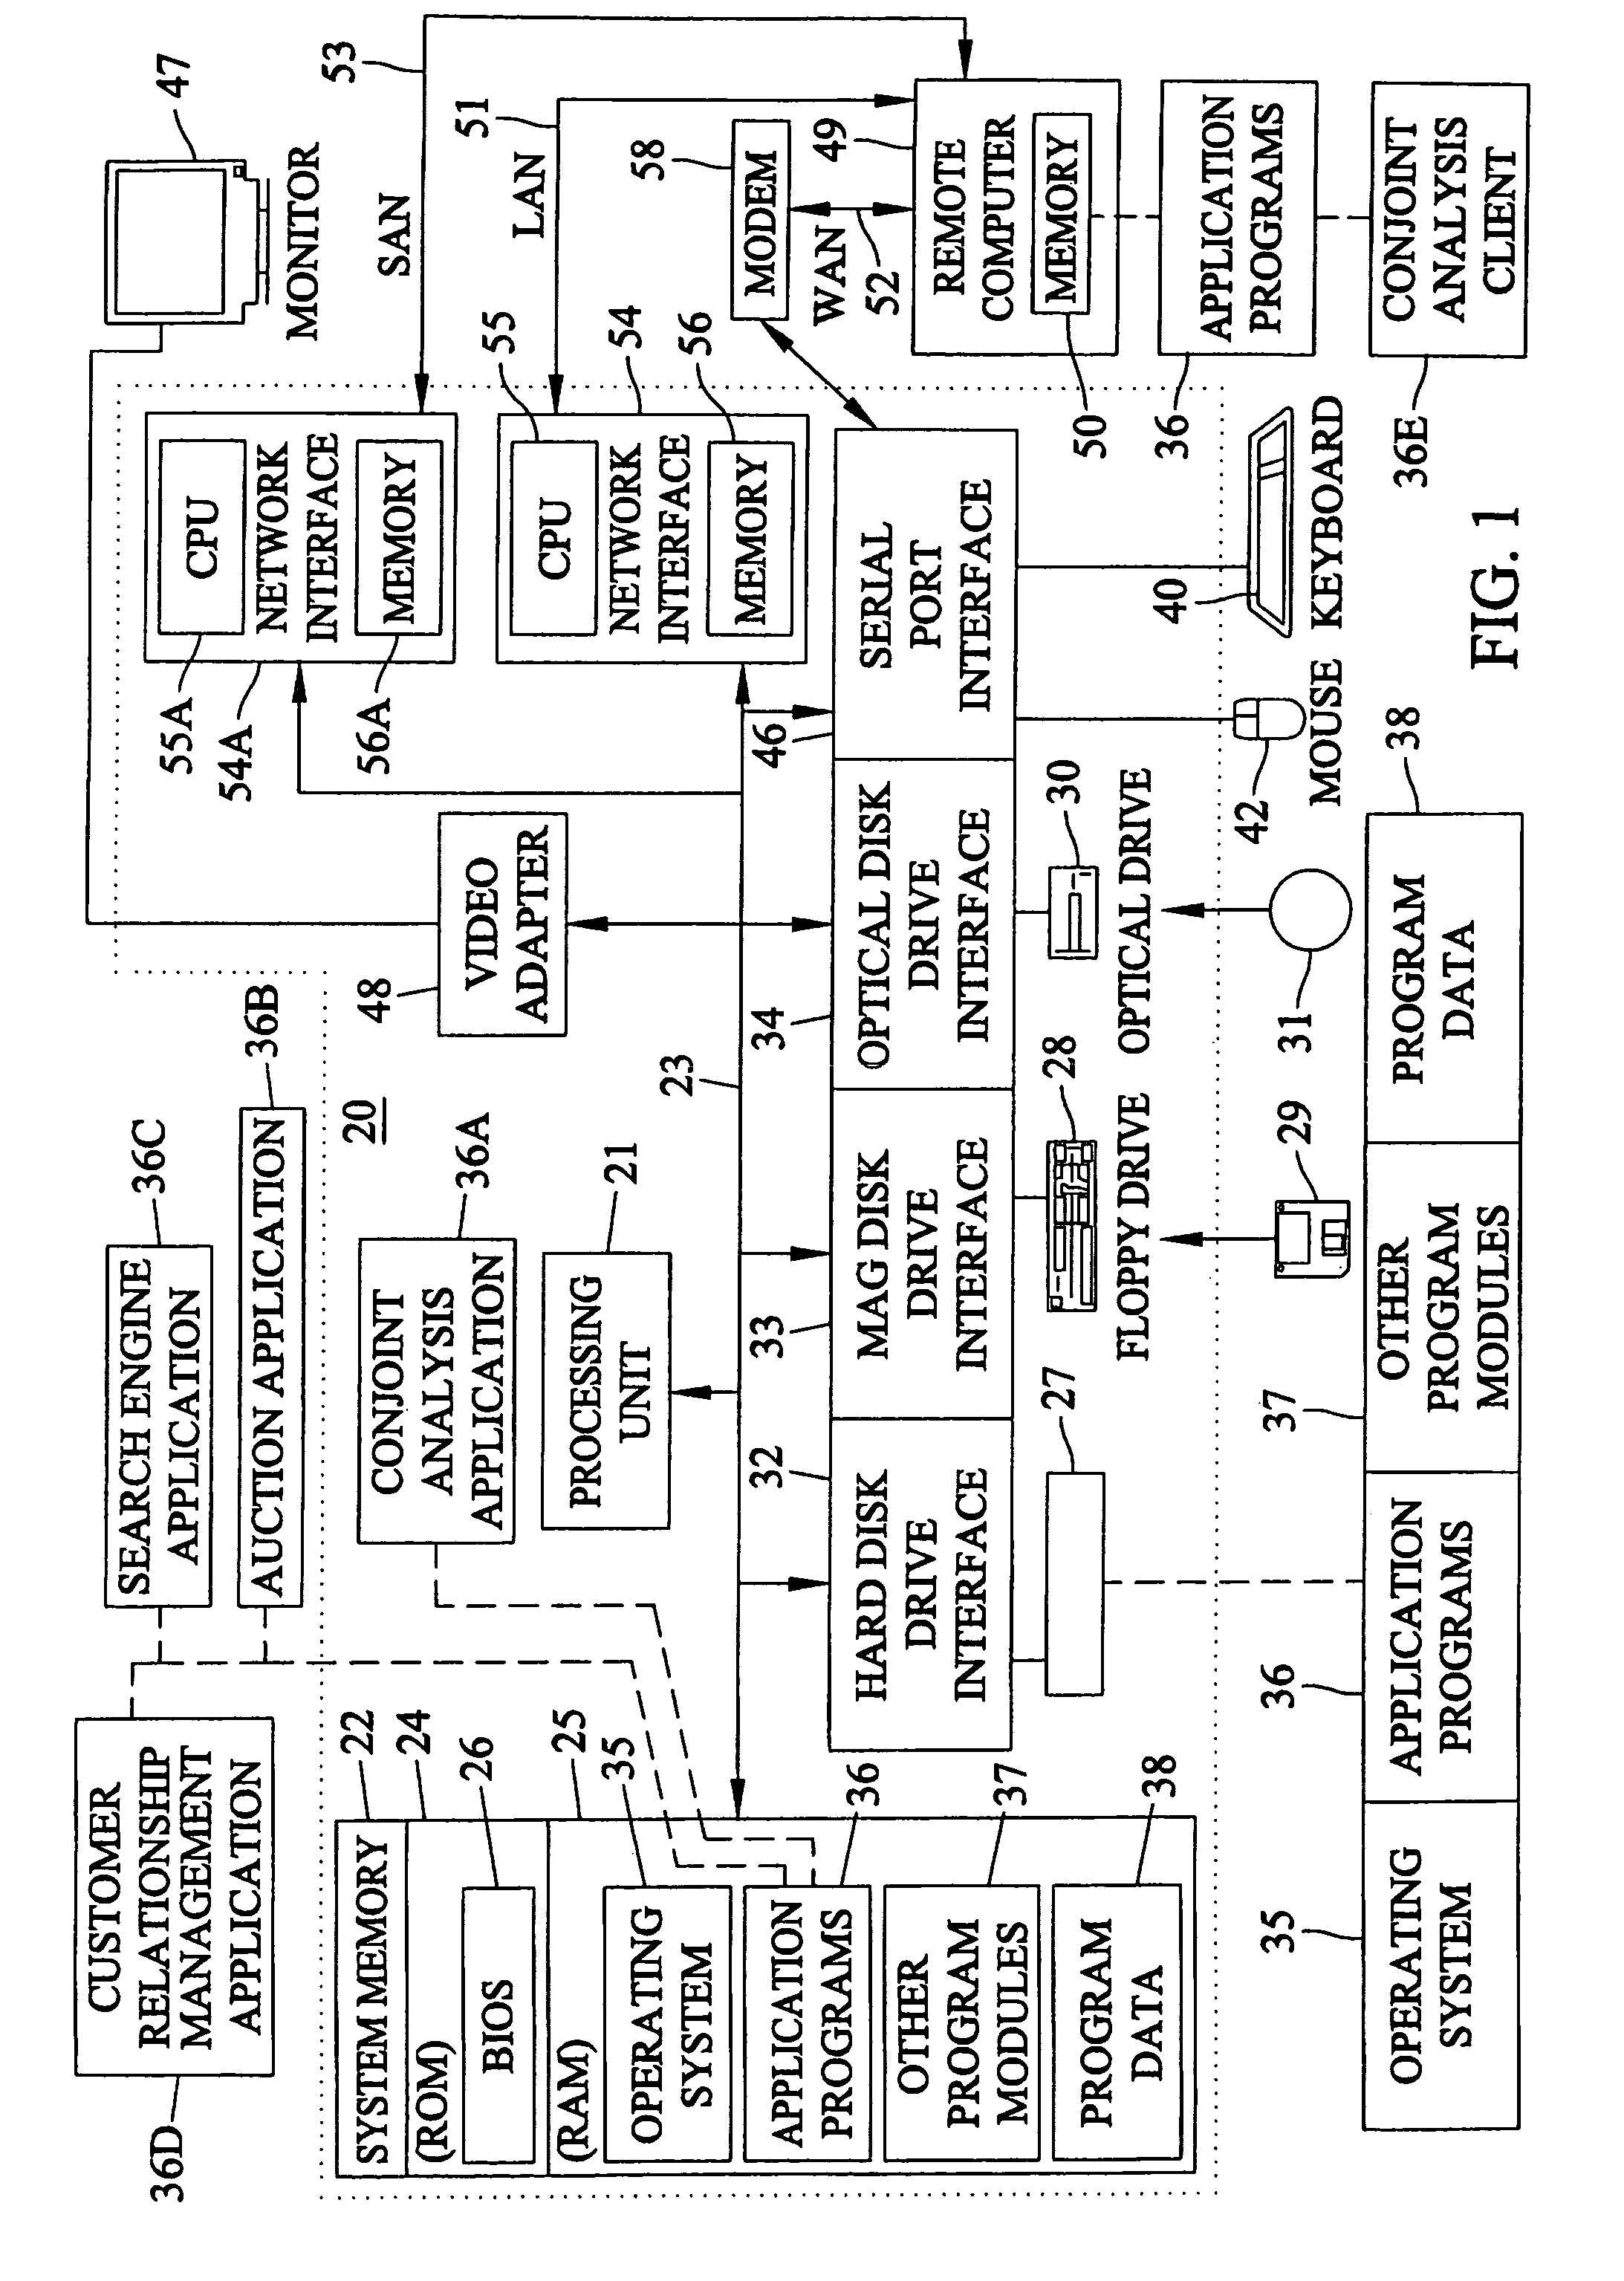 Methods, systems, and computer program products for facilitating user interaction with customer relationship management, auction, and search engine software using conjoint analysis